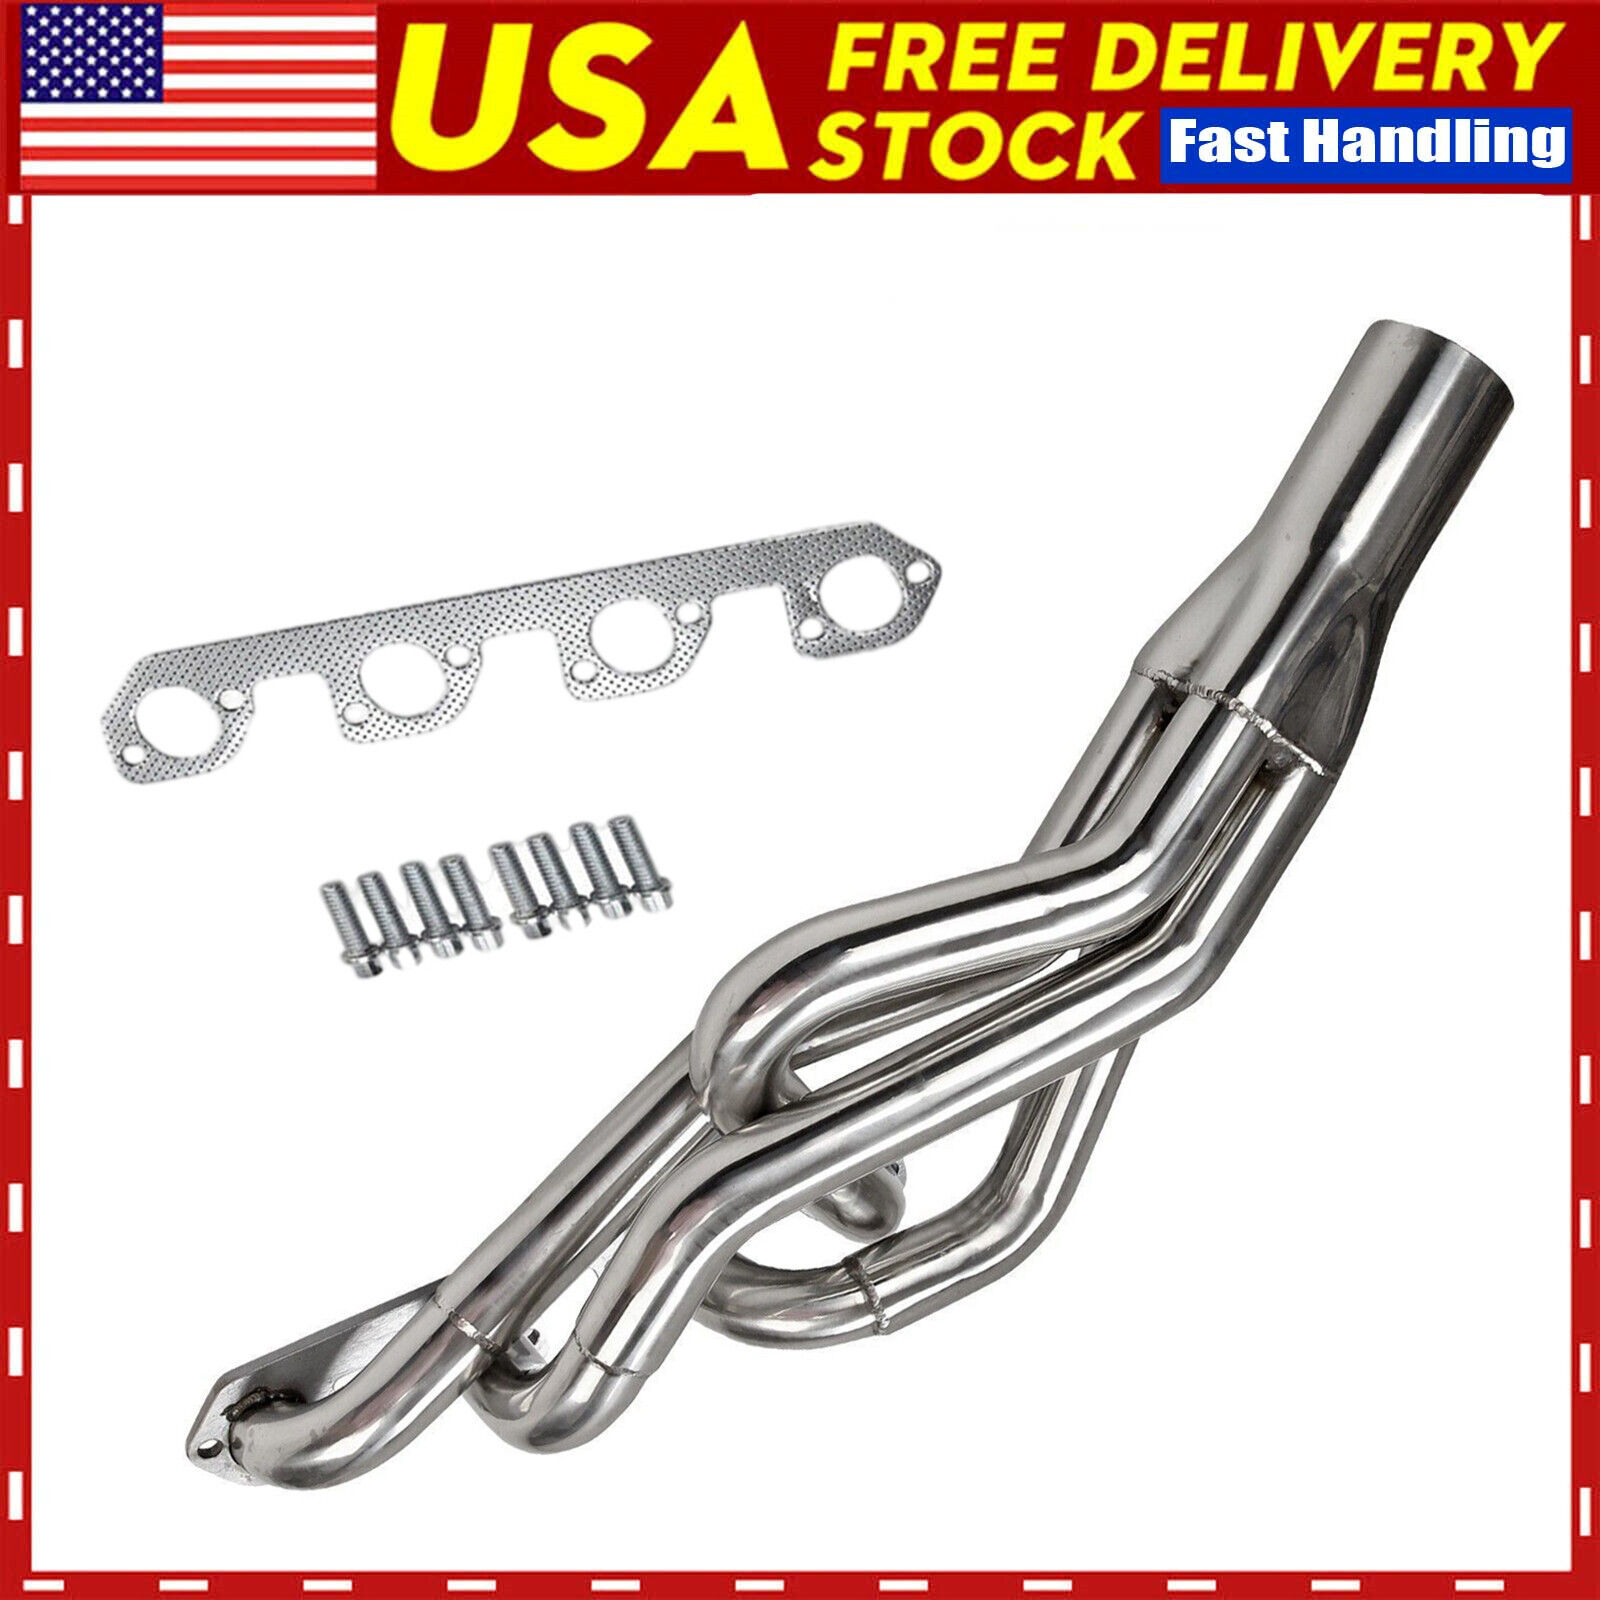 Stainless Steel Manifold Headers Fits for 74-80 Ford Pinto 82-92 Ranger 2.3L Pro